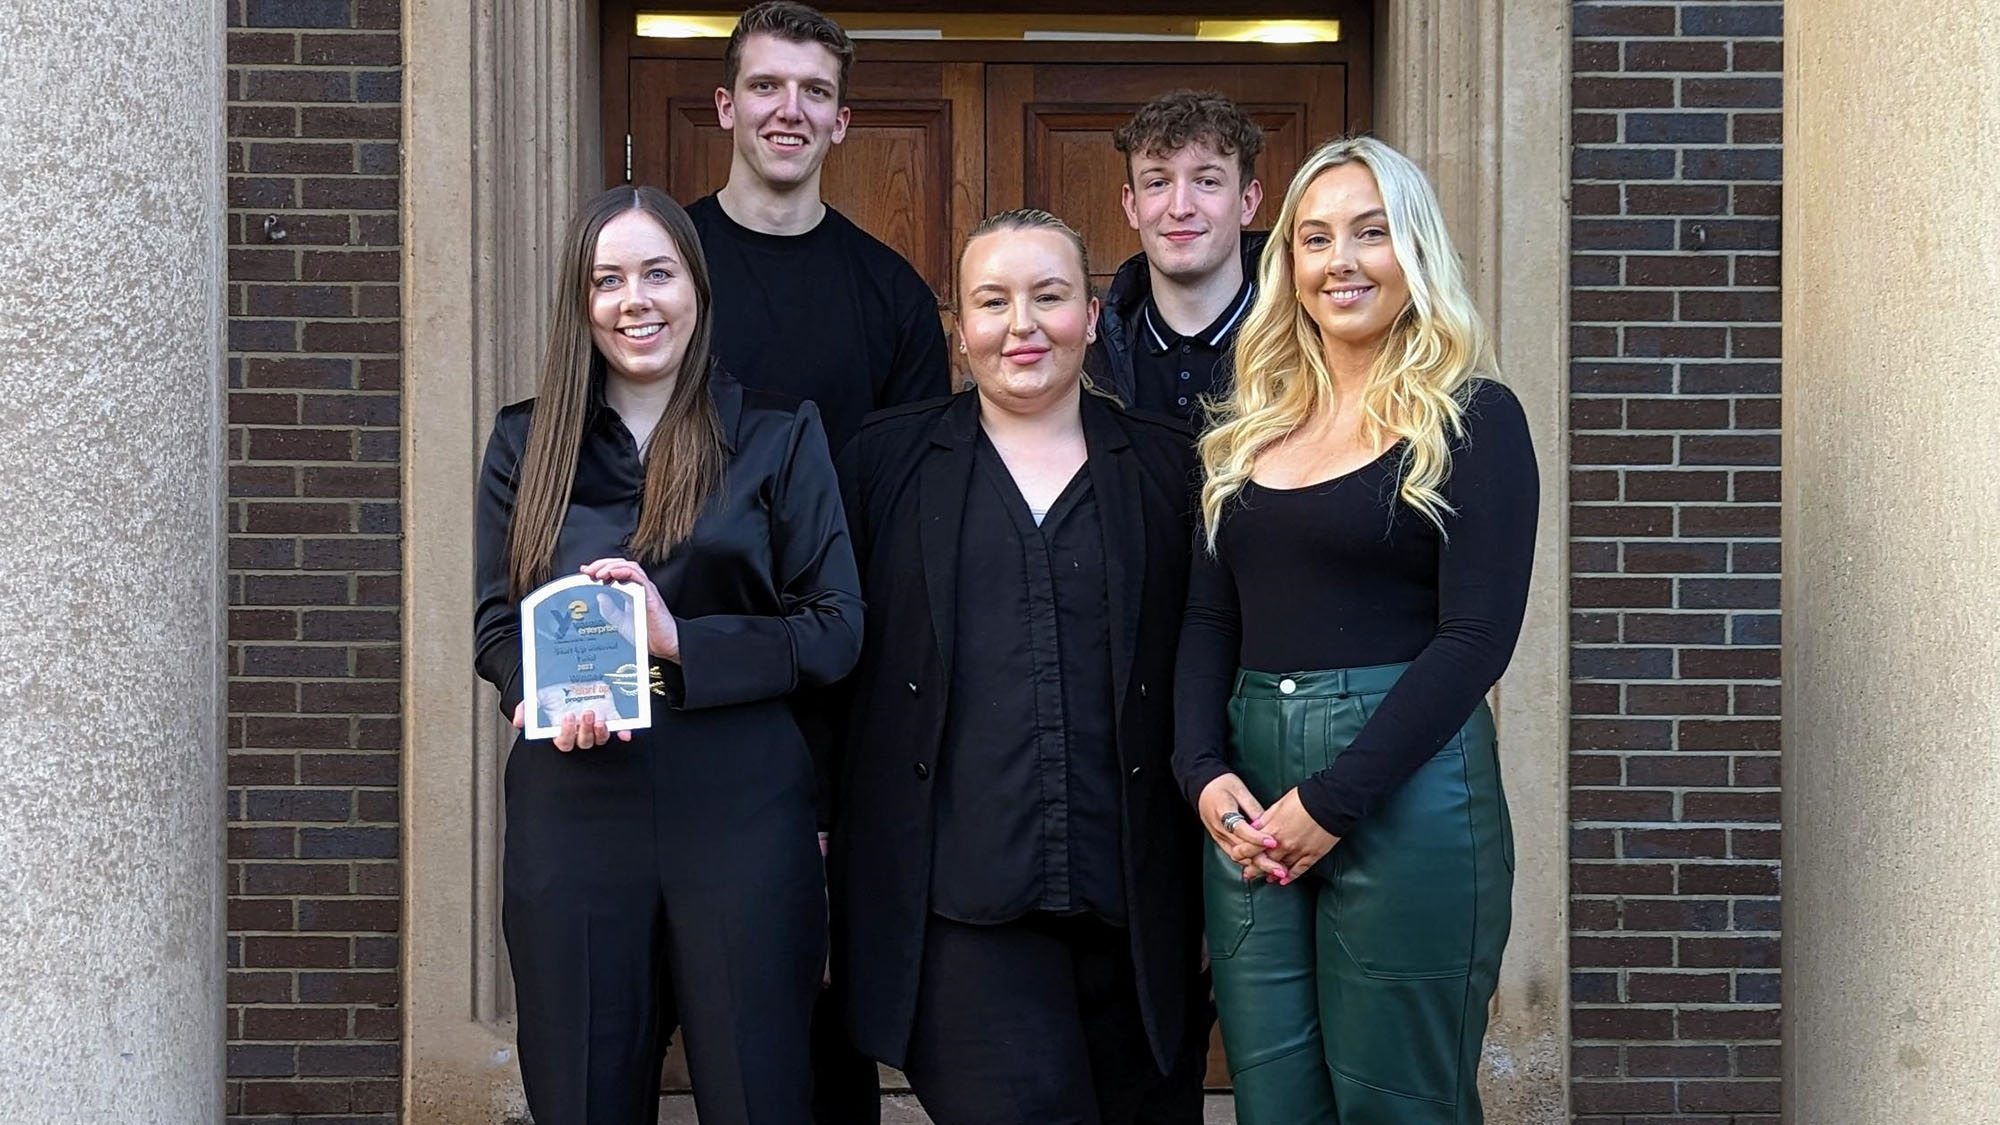 Business School Students Win a Place in the Final of a Regional Competition!